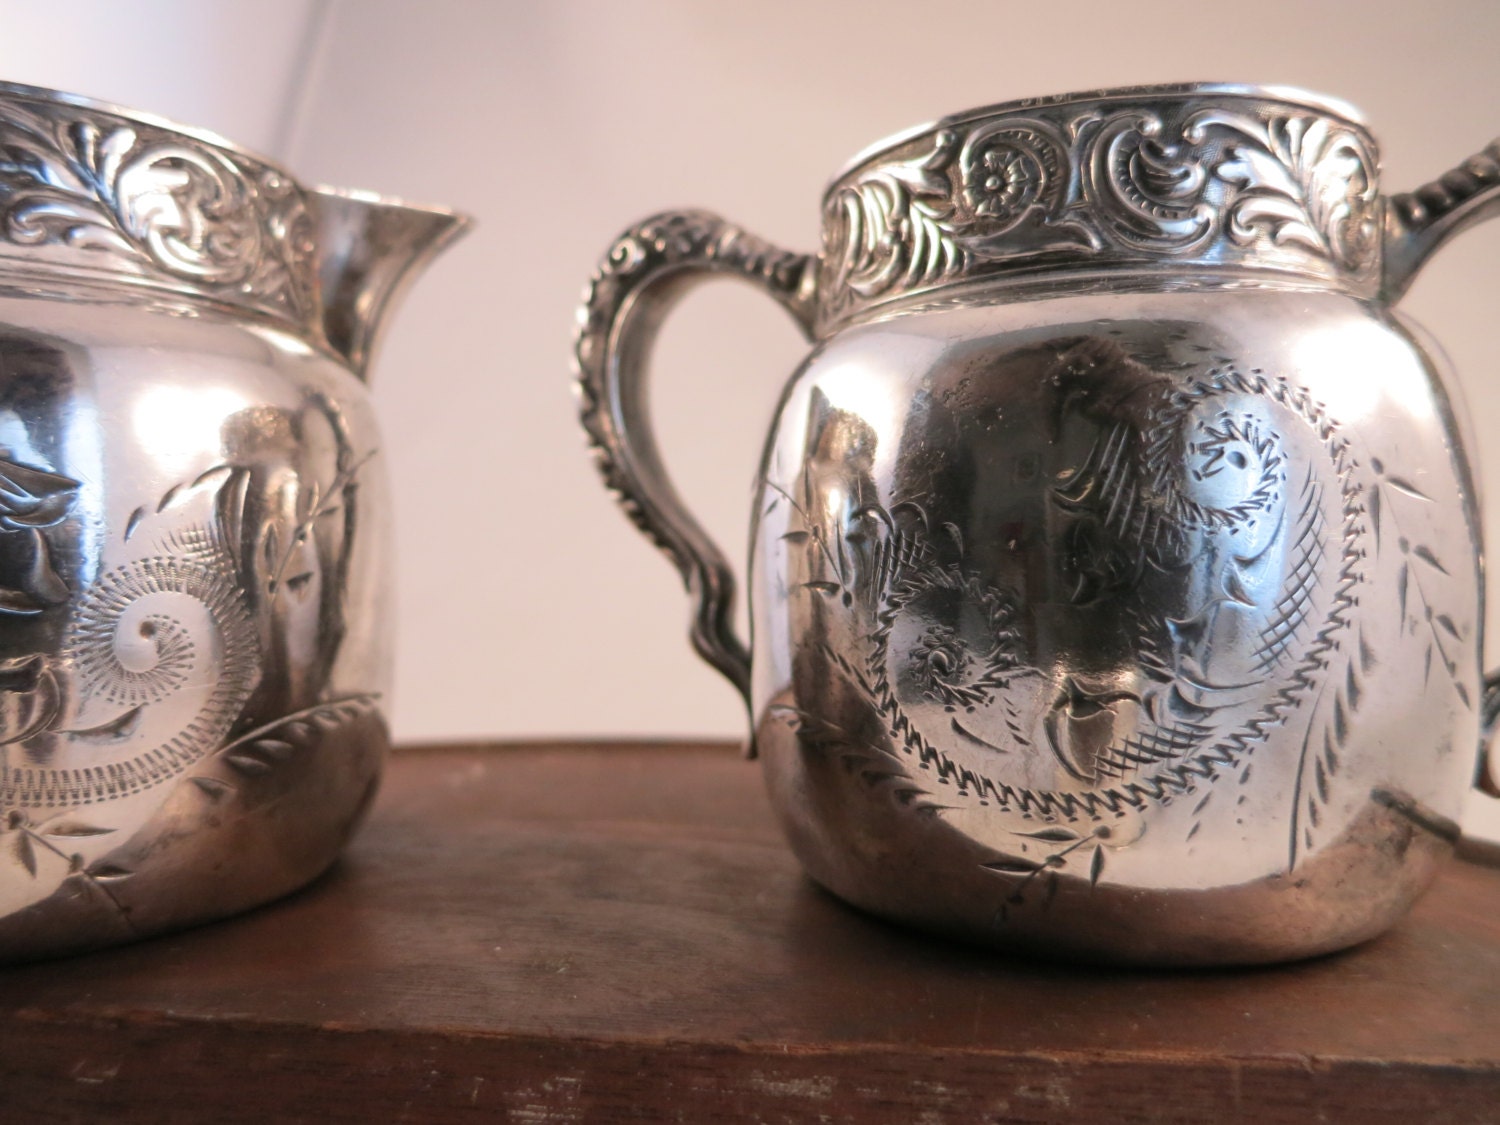 VINTAGE ST. LOUIS Silver Co. Quadruple Silver Plated Lidded Wine/Beer Stein  $50.00 - PicClick